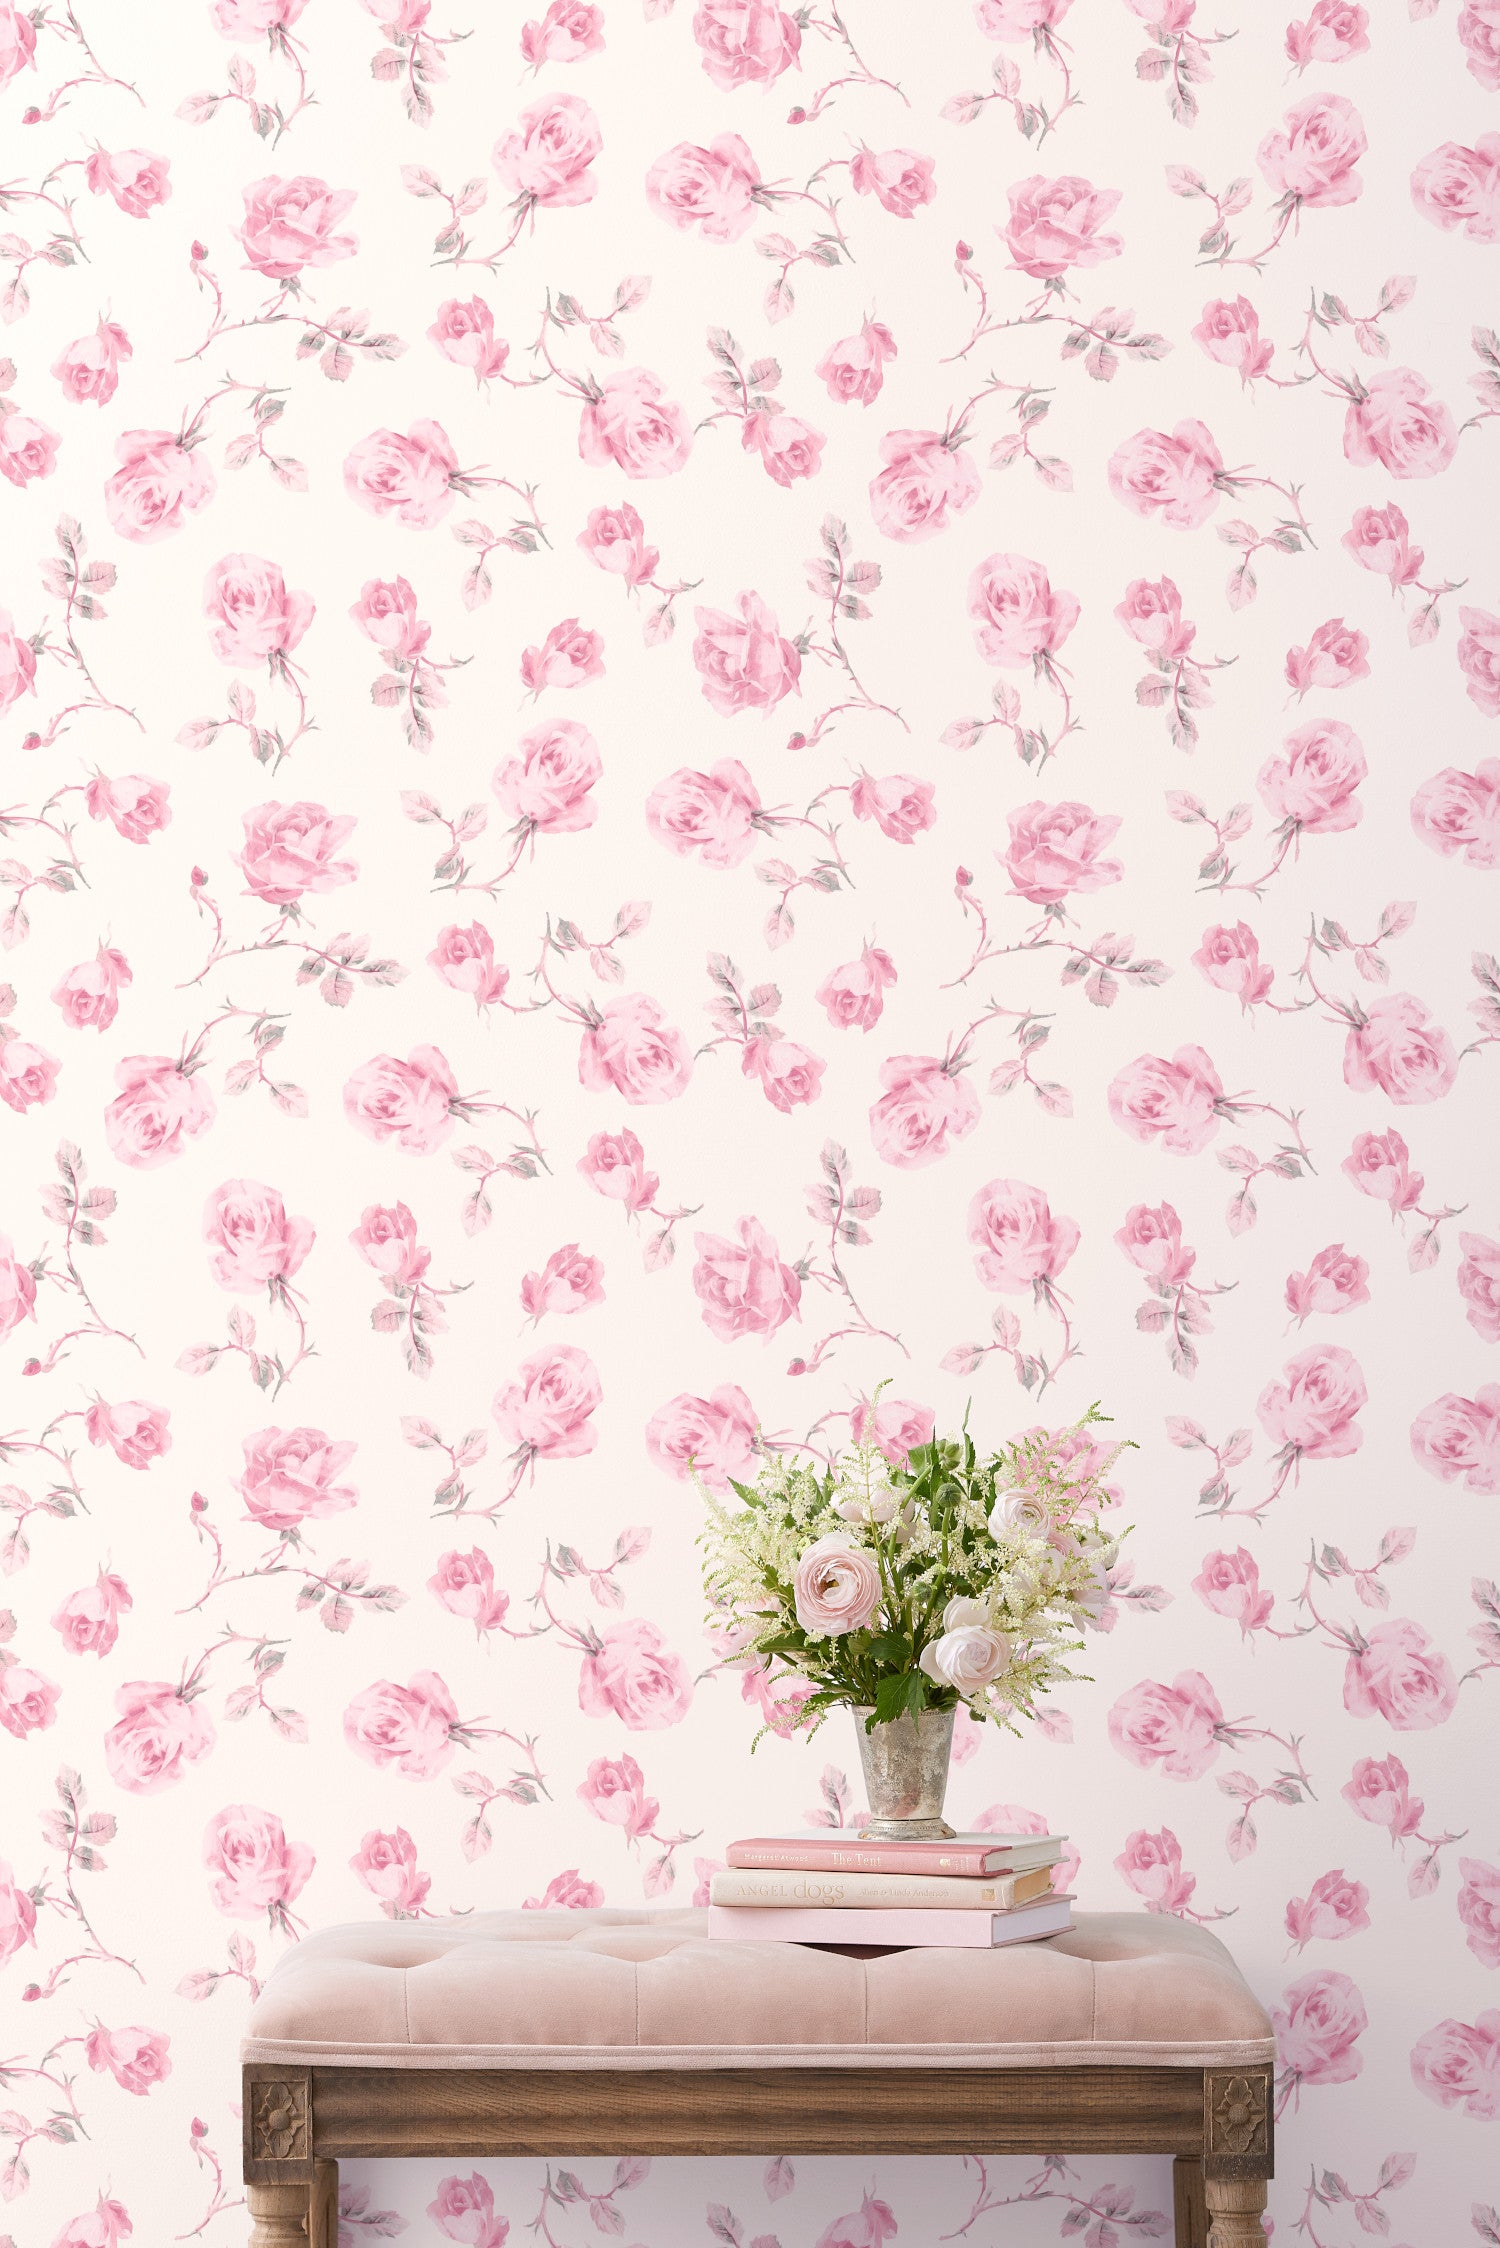 pale pink floral backgrounds